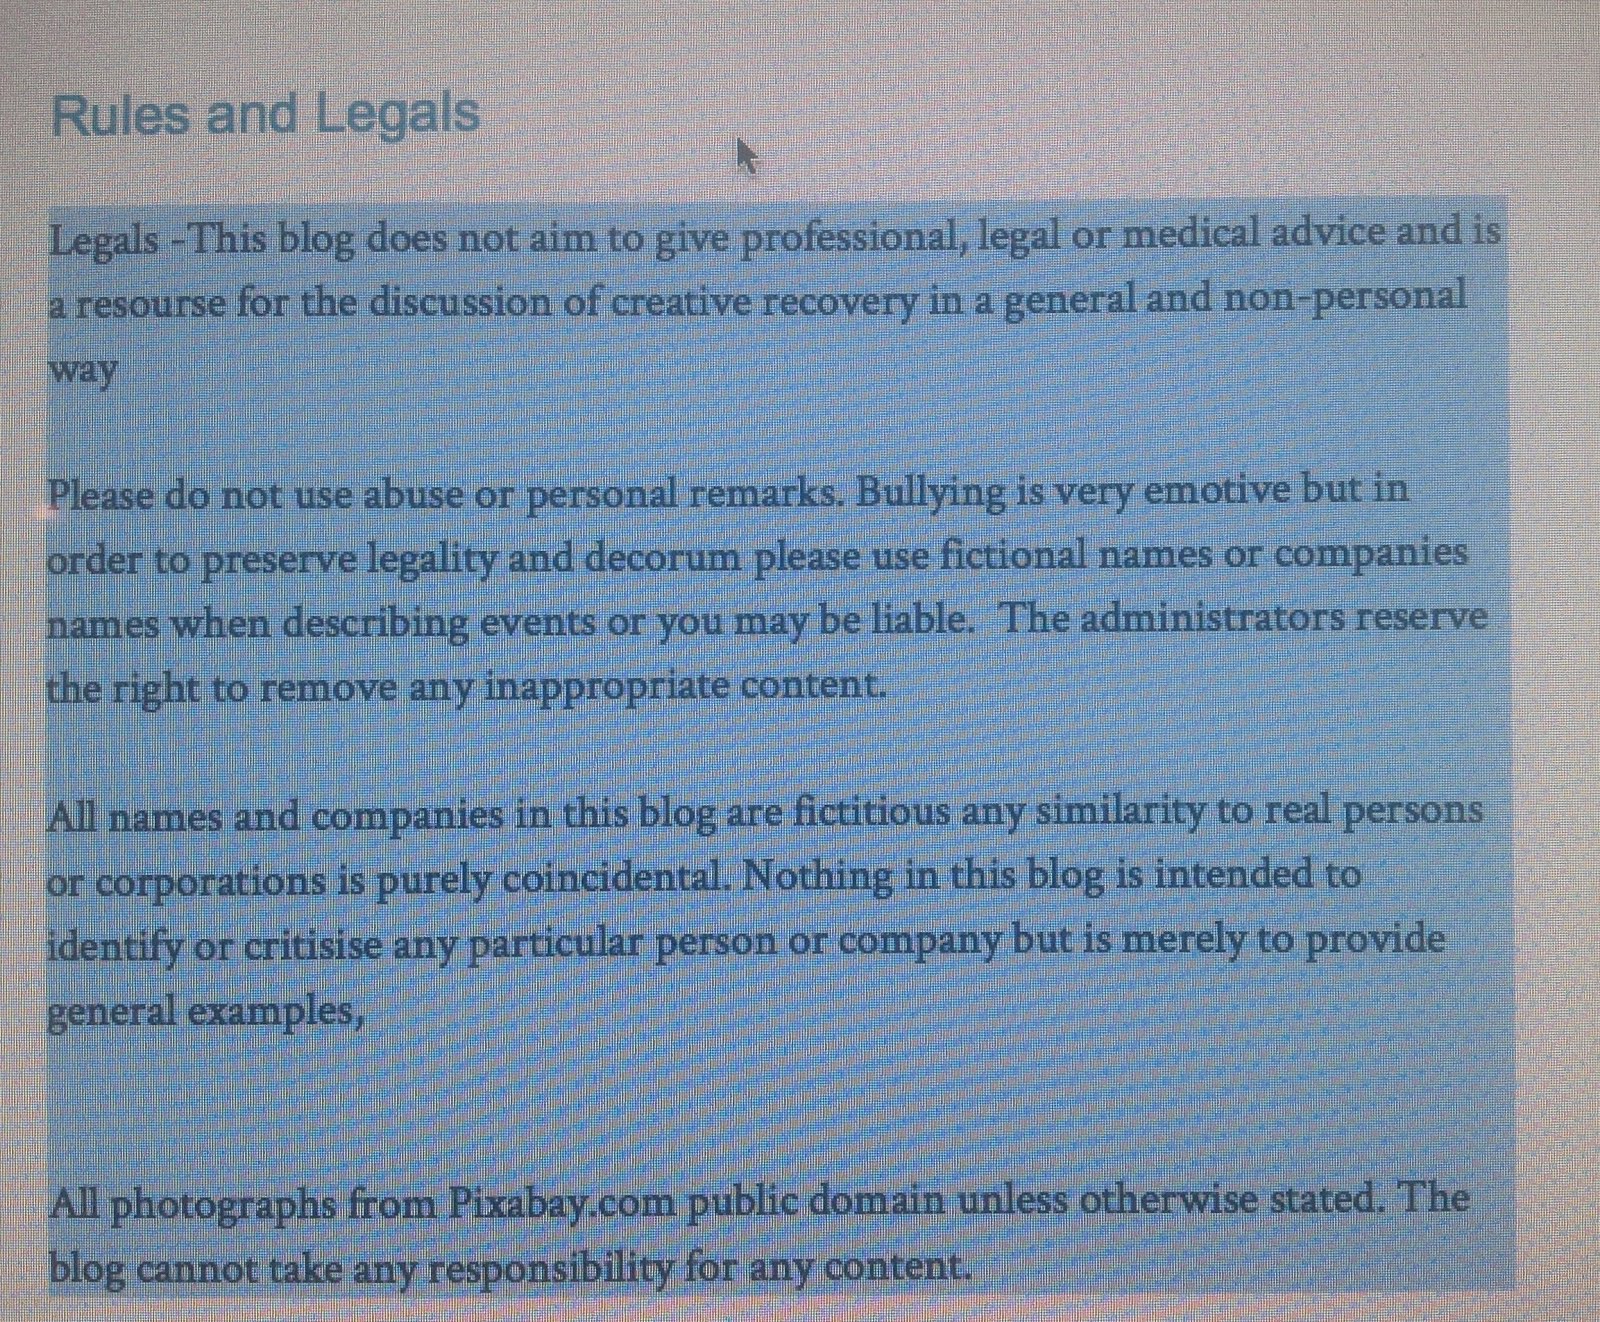 Rules and legals